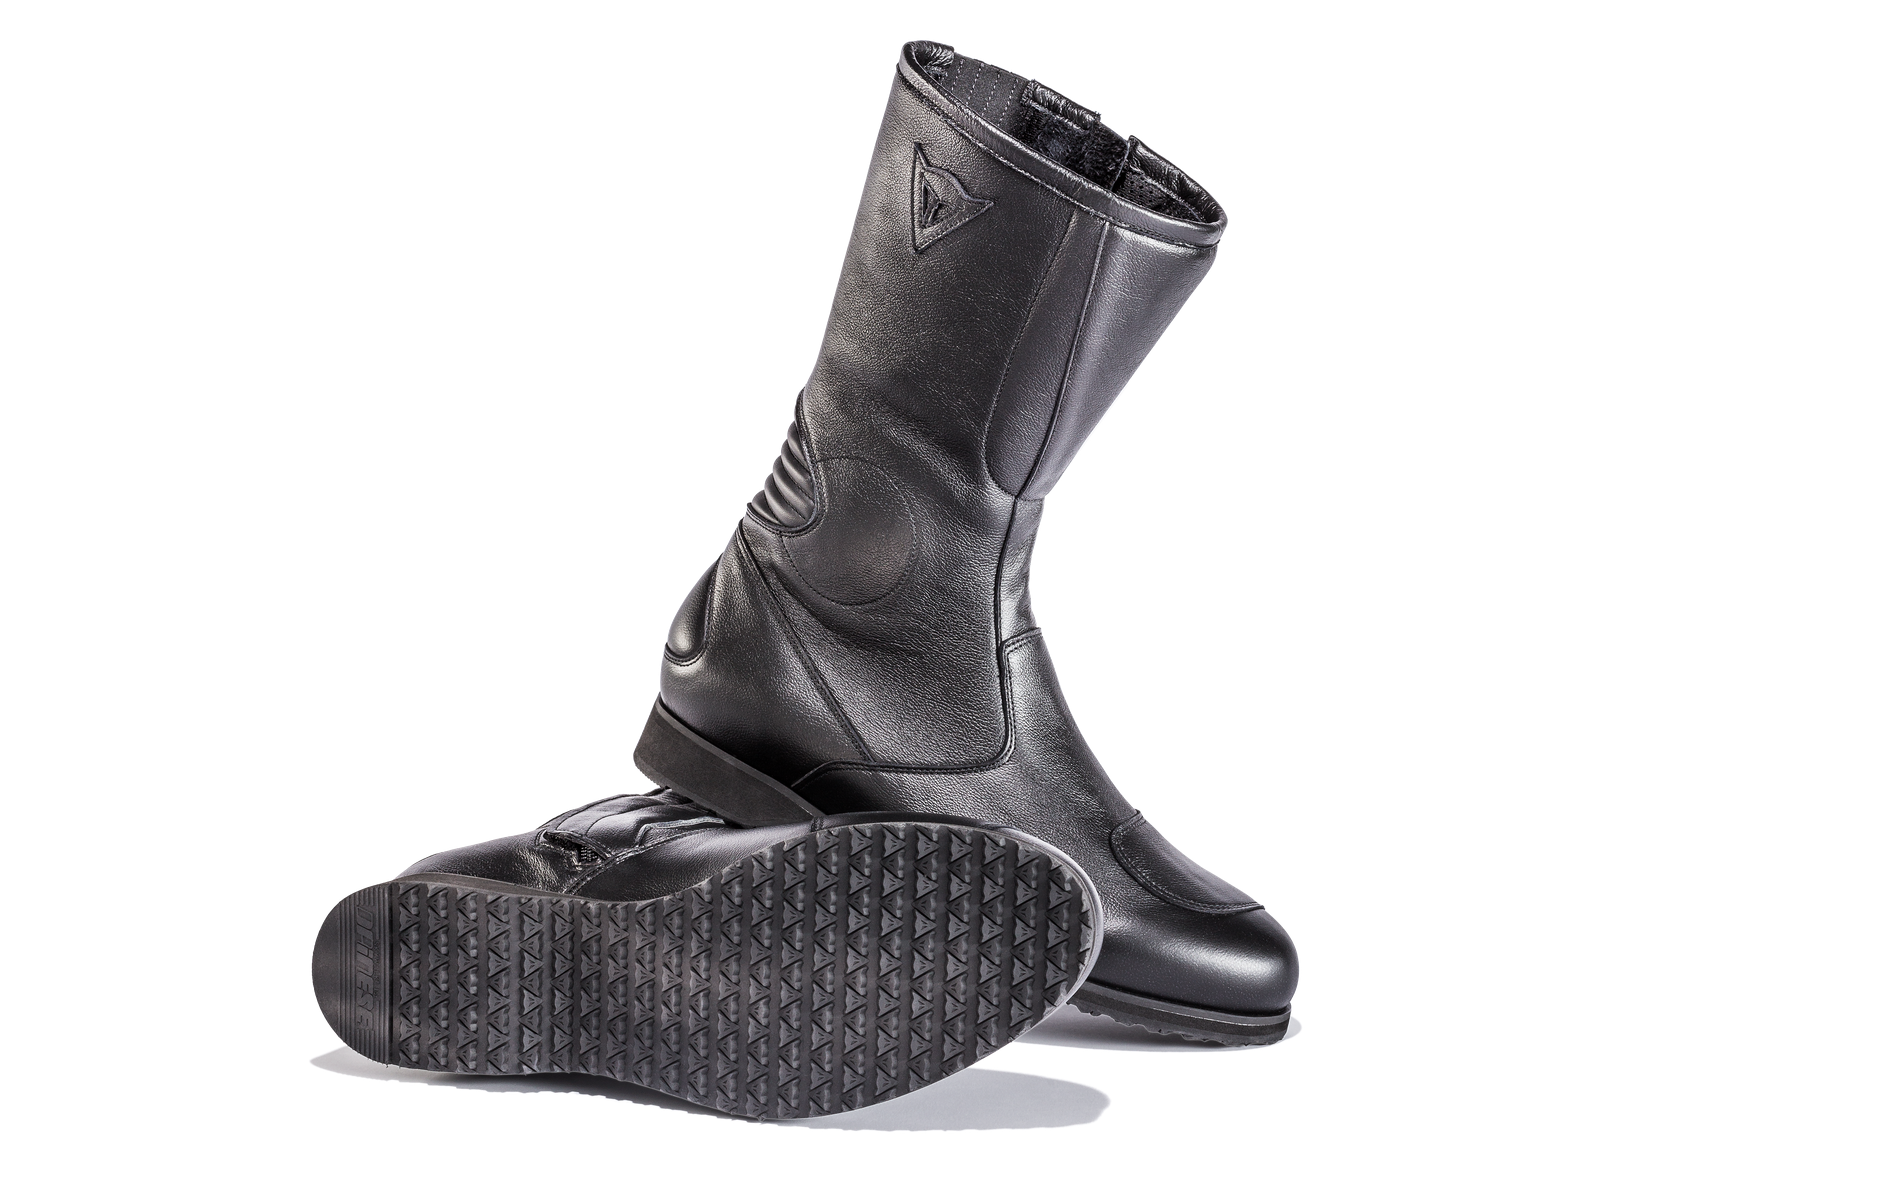 Dainese Imola72 boots review | Visordown